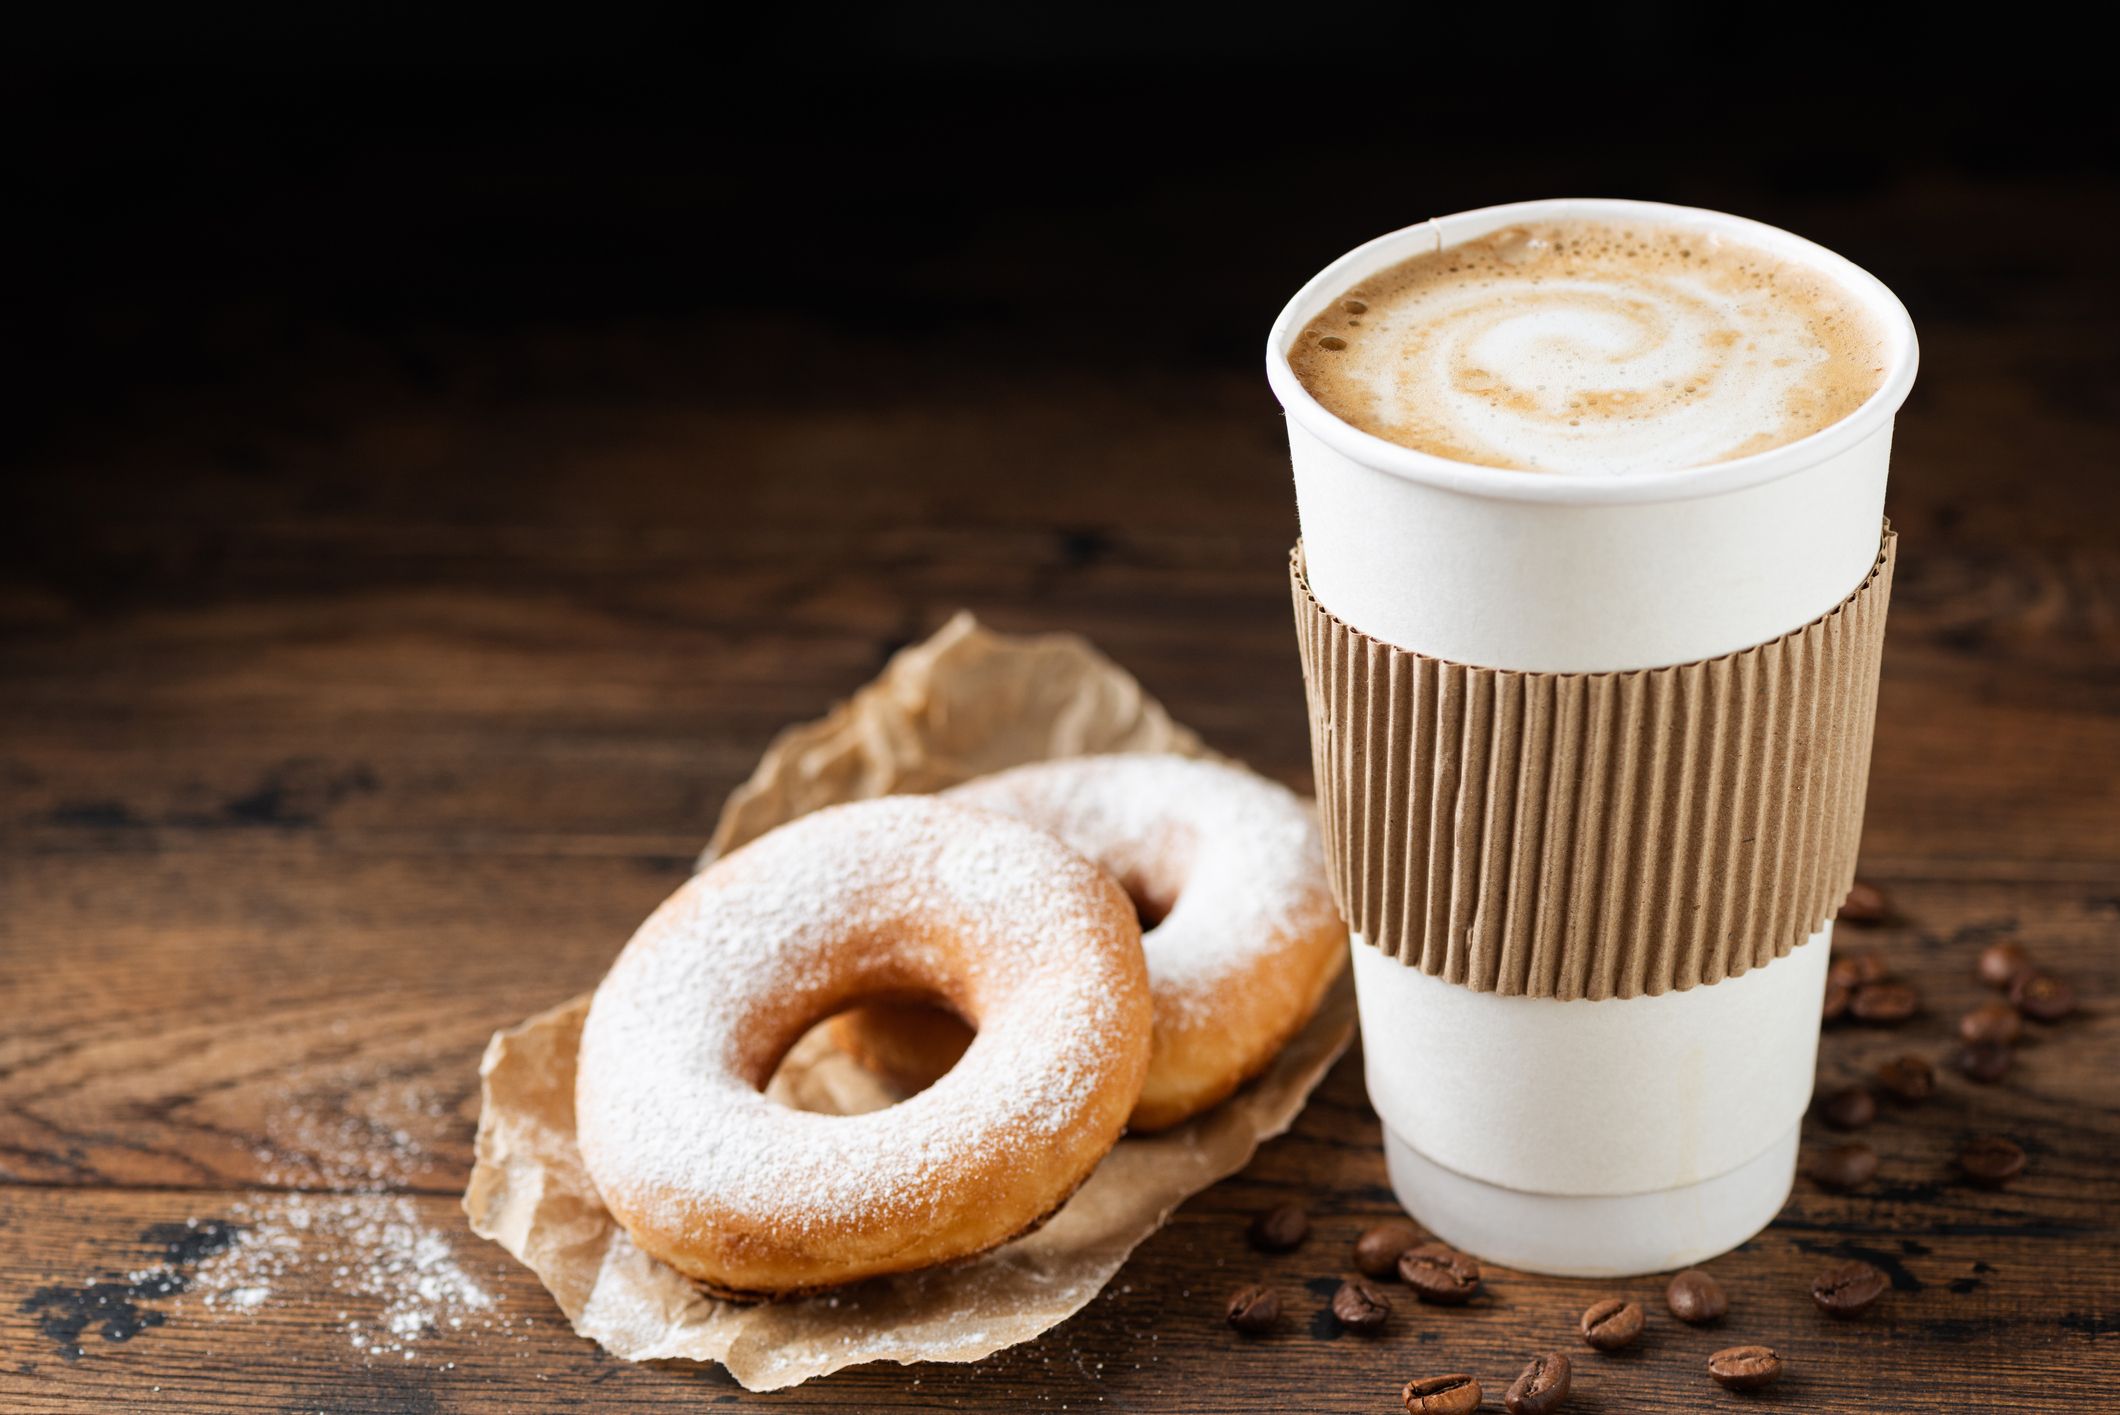 https://hips.hearstapps.com/hmg-prod/images/takeaway-coffee-cup-and-donuts-royalty-free-image-1695909383.jpg